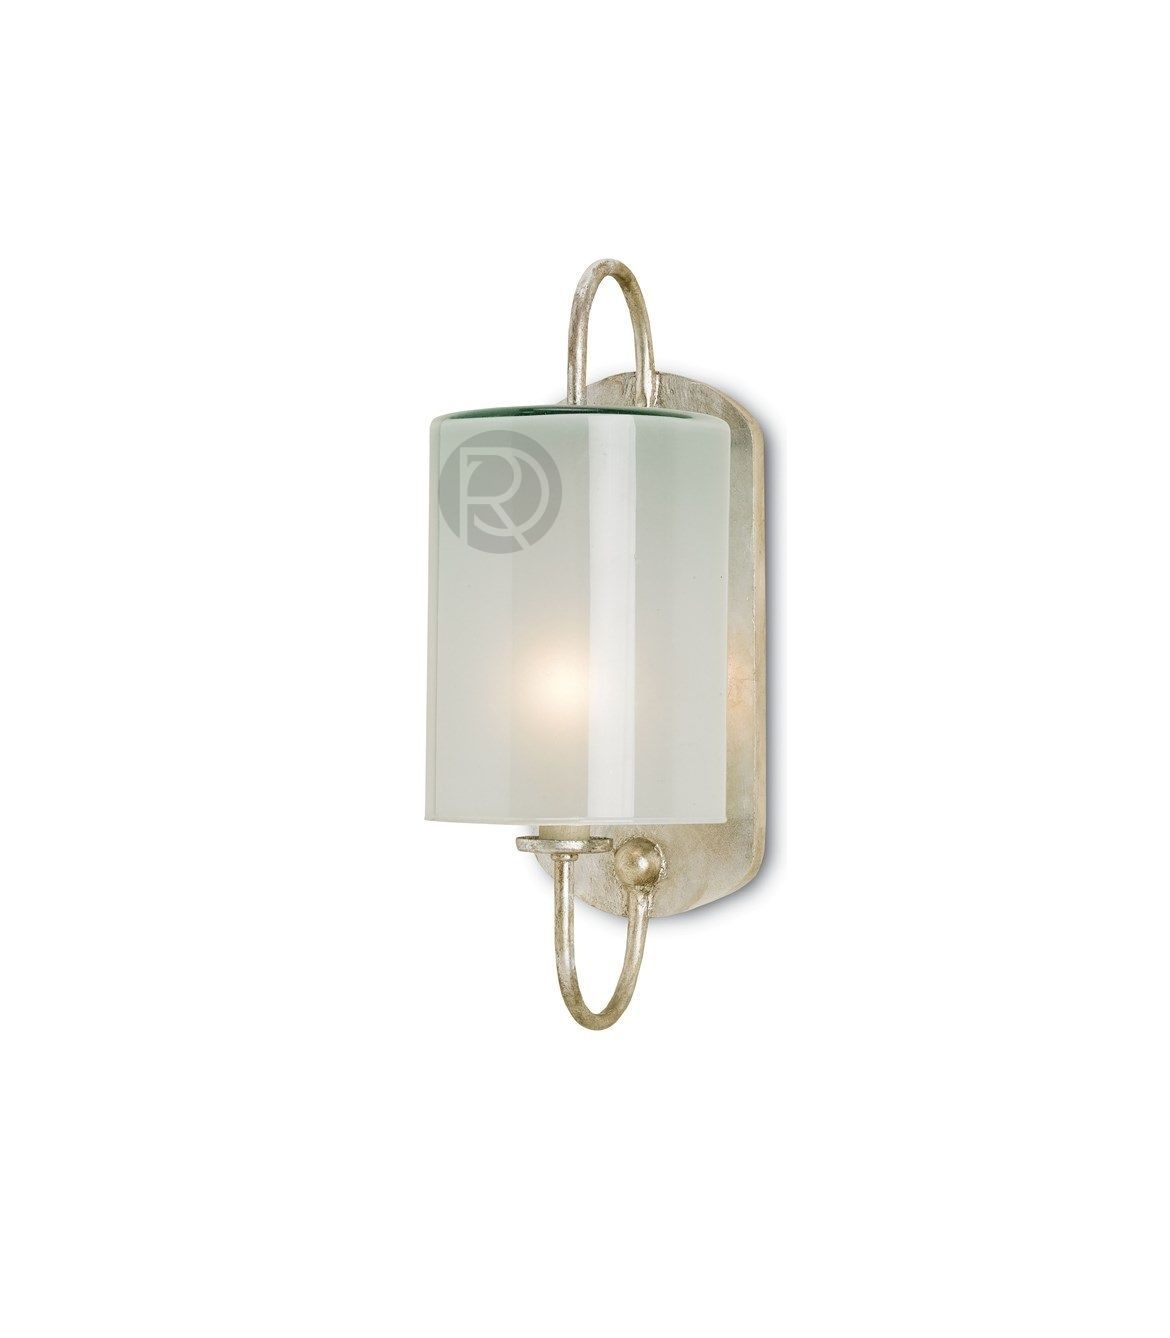 Wall lamp (Sconce) GLACIER by Currey & Company